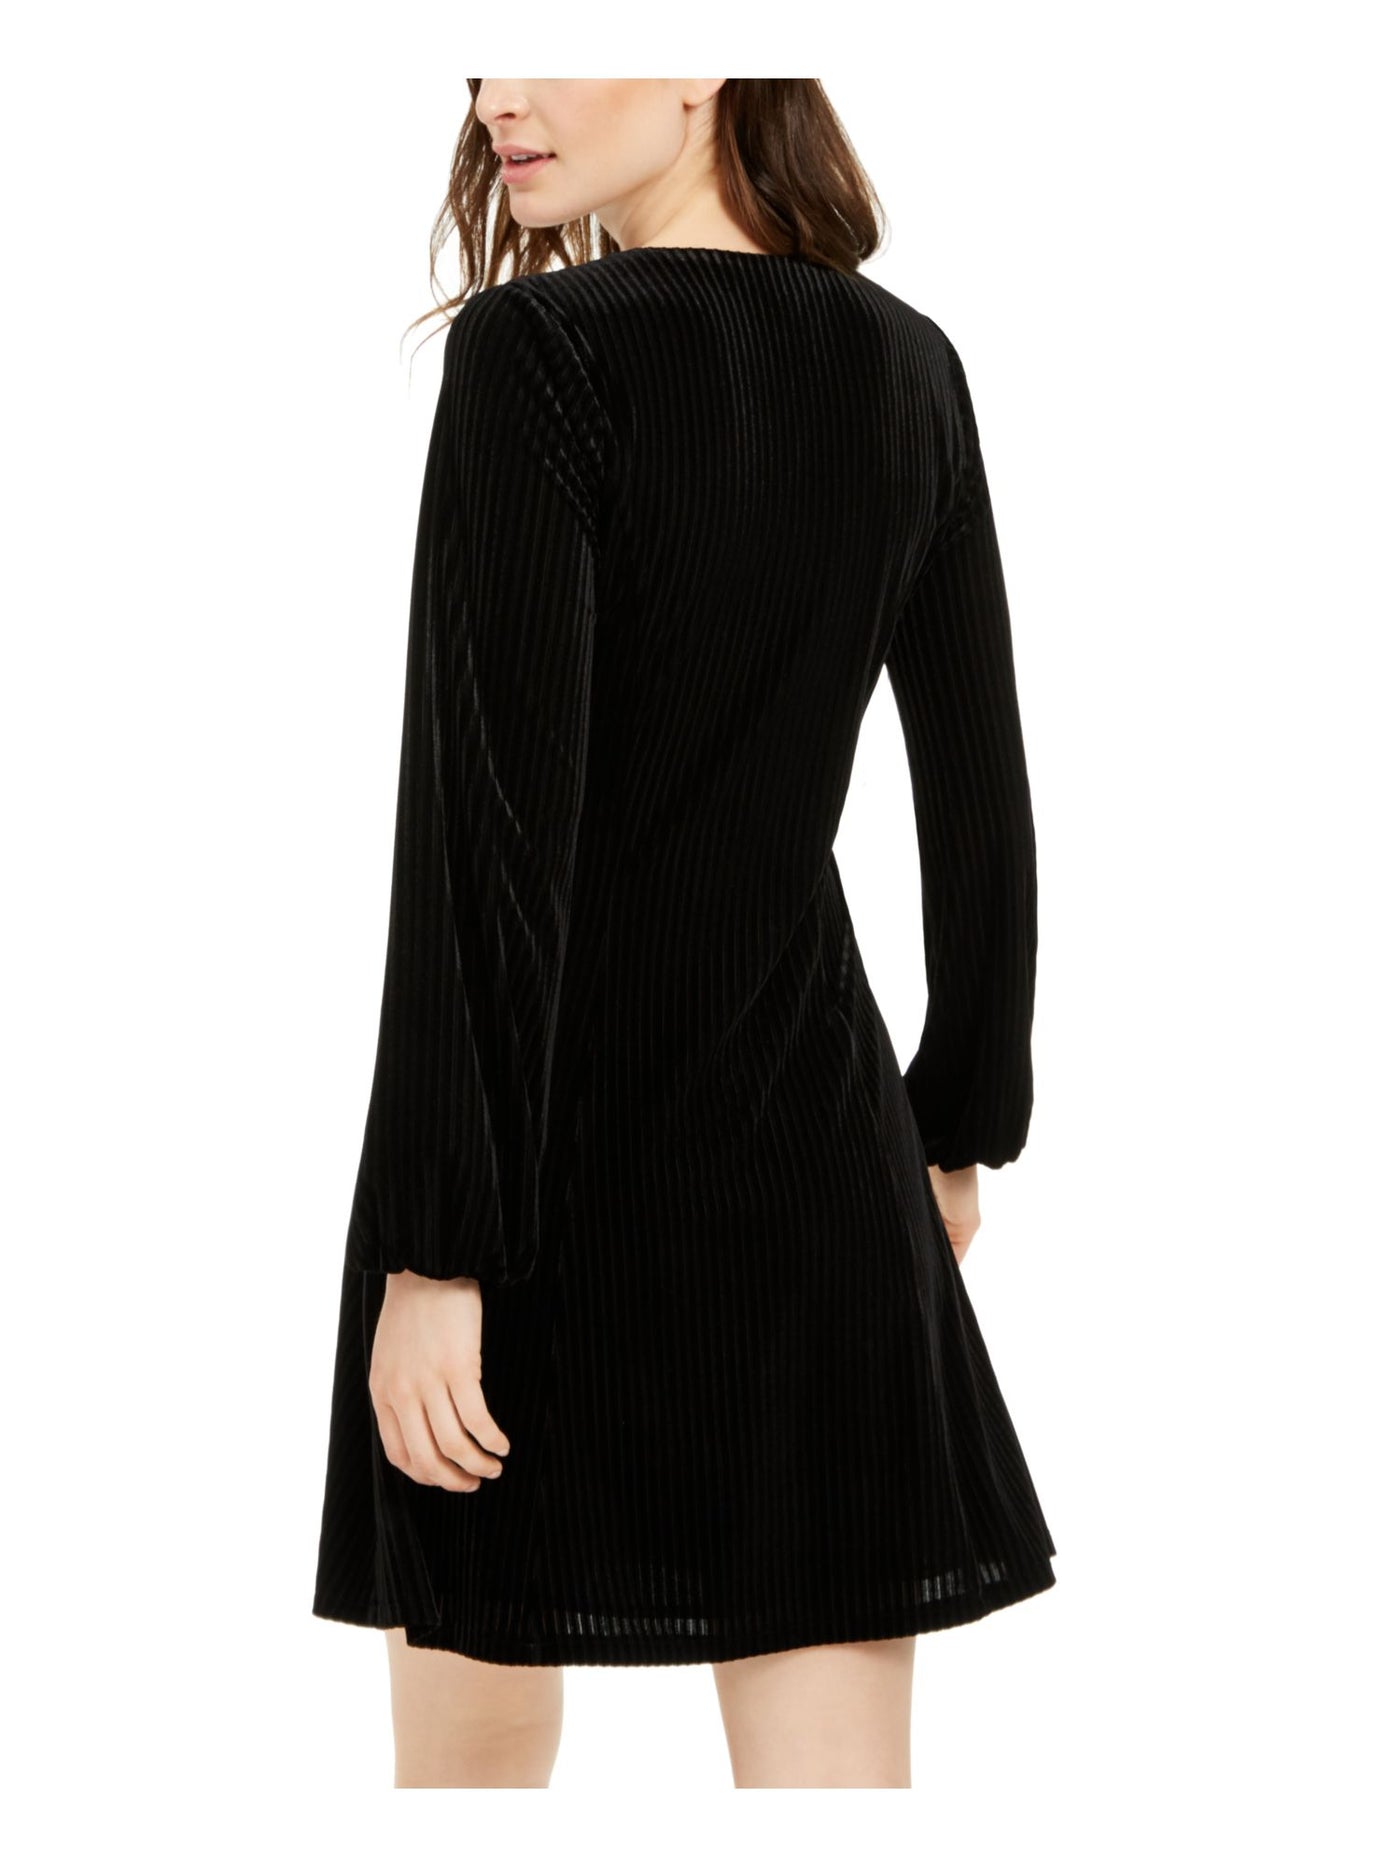 19 COOPER Womens Black Long Sleeve V Neck Mini Party Fit + Flare Dress S